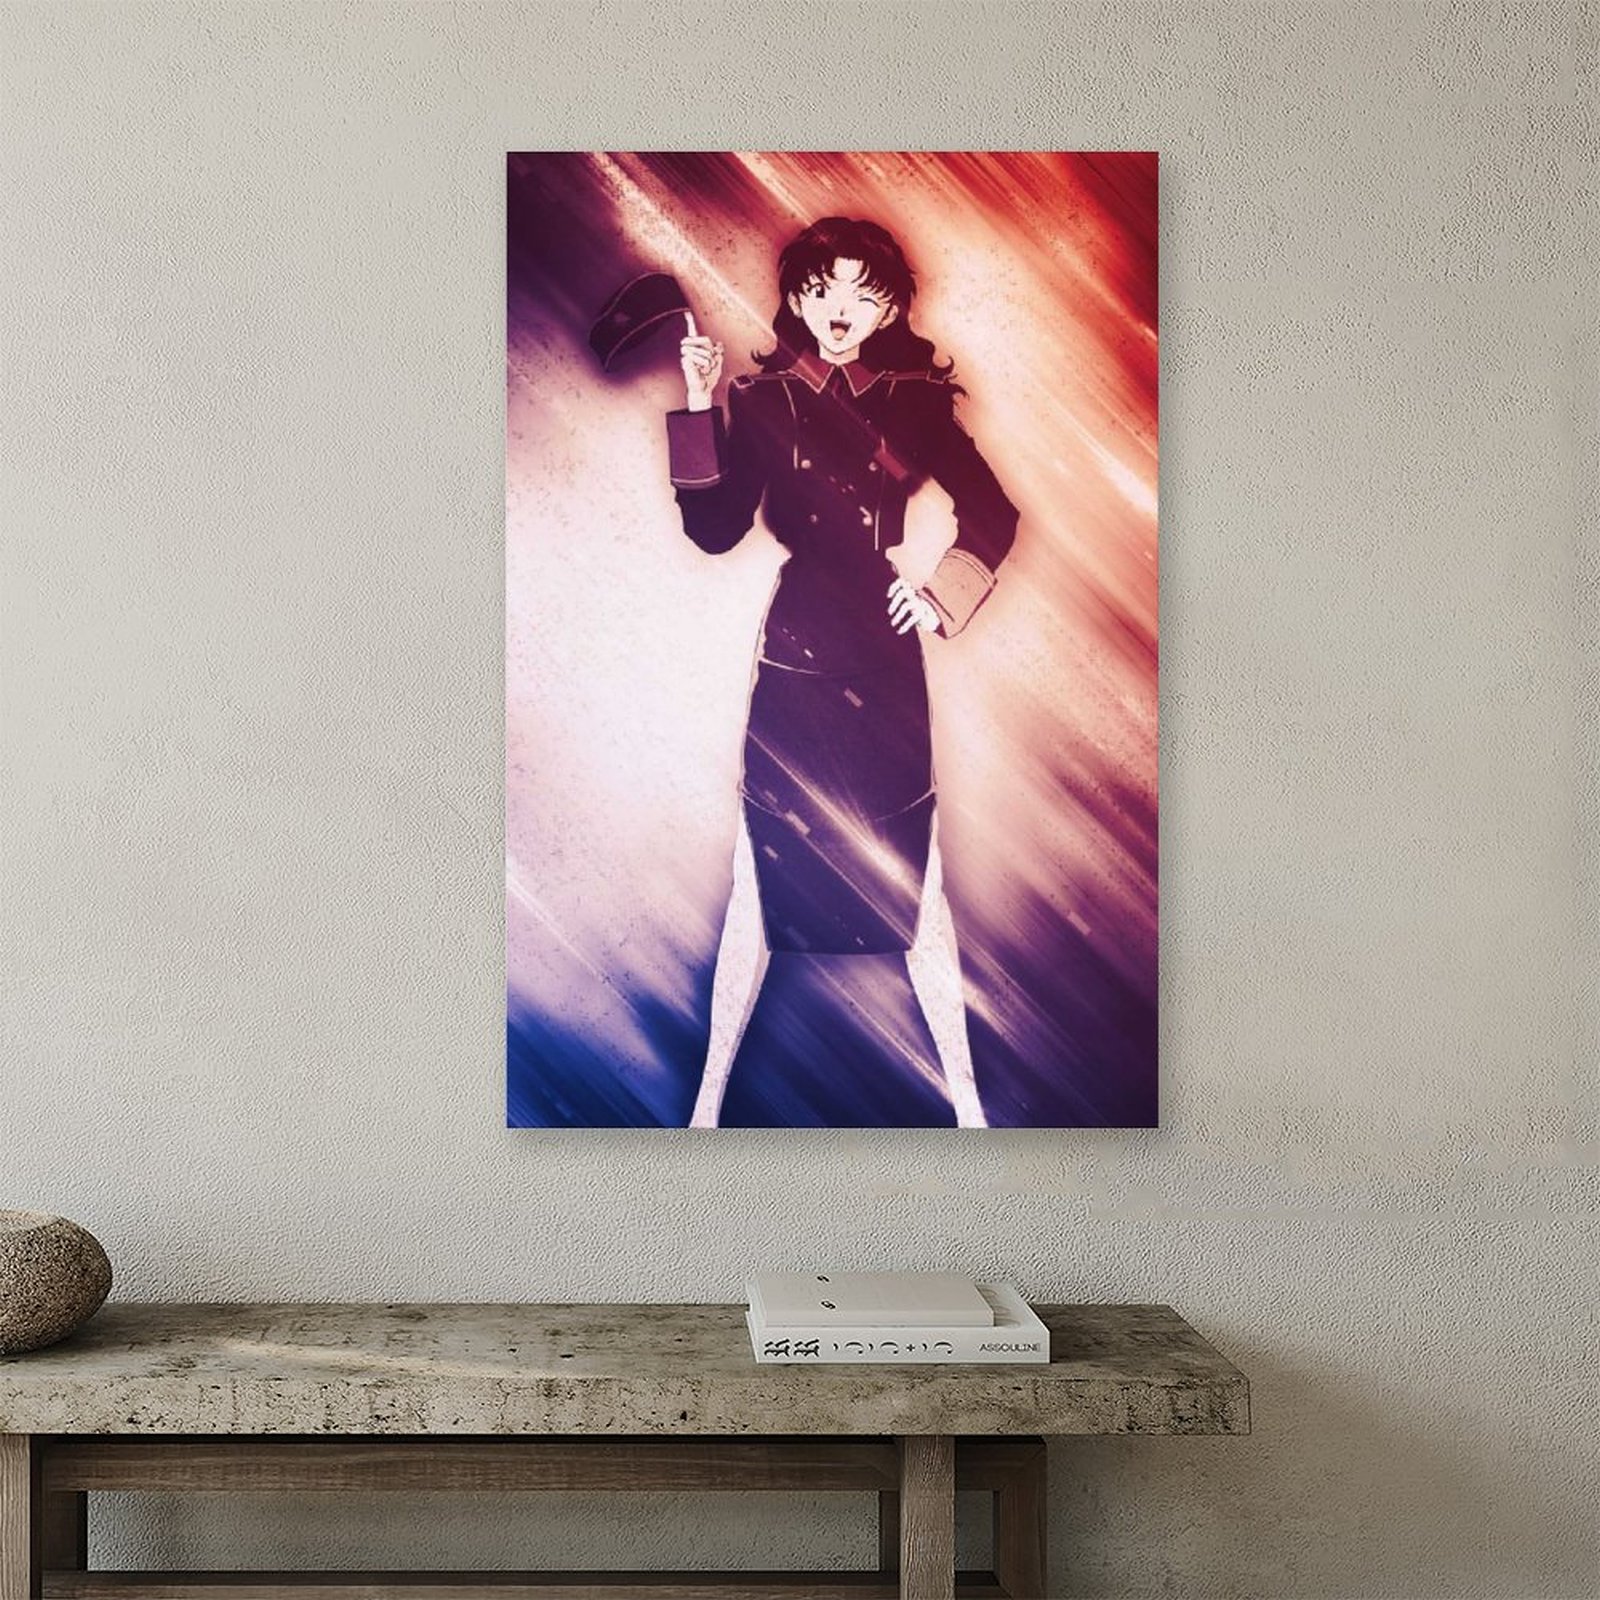 Anime Misato Evangelion GirlCanvas Painting Wall Art Posters and Prints Wall Pictures for Living Room Decoration 3 - Evangelion Shop